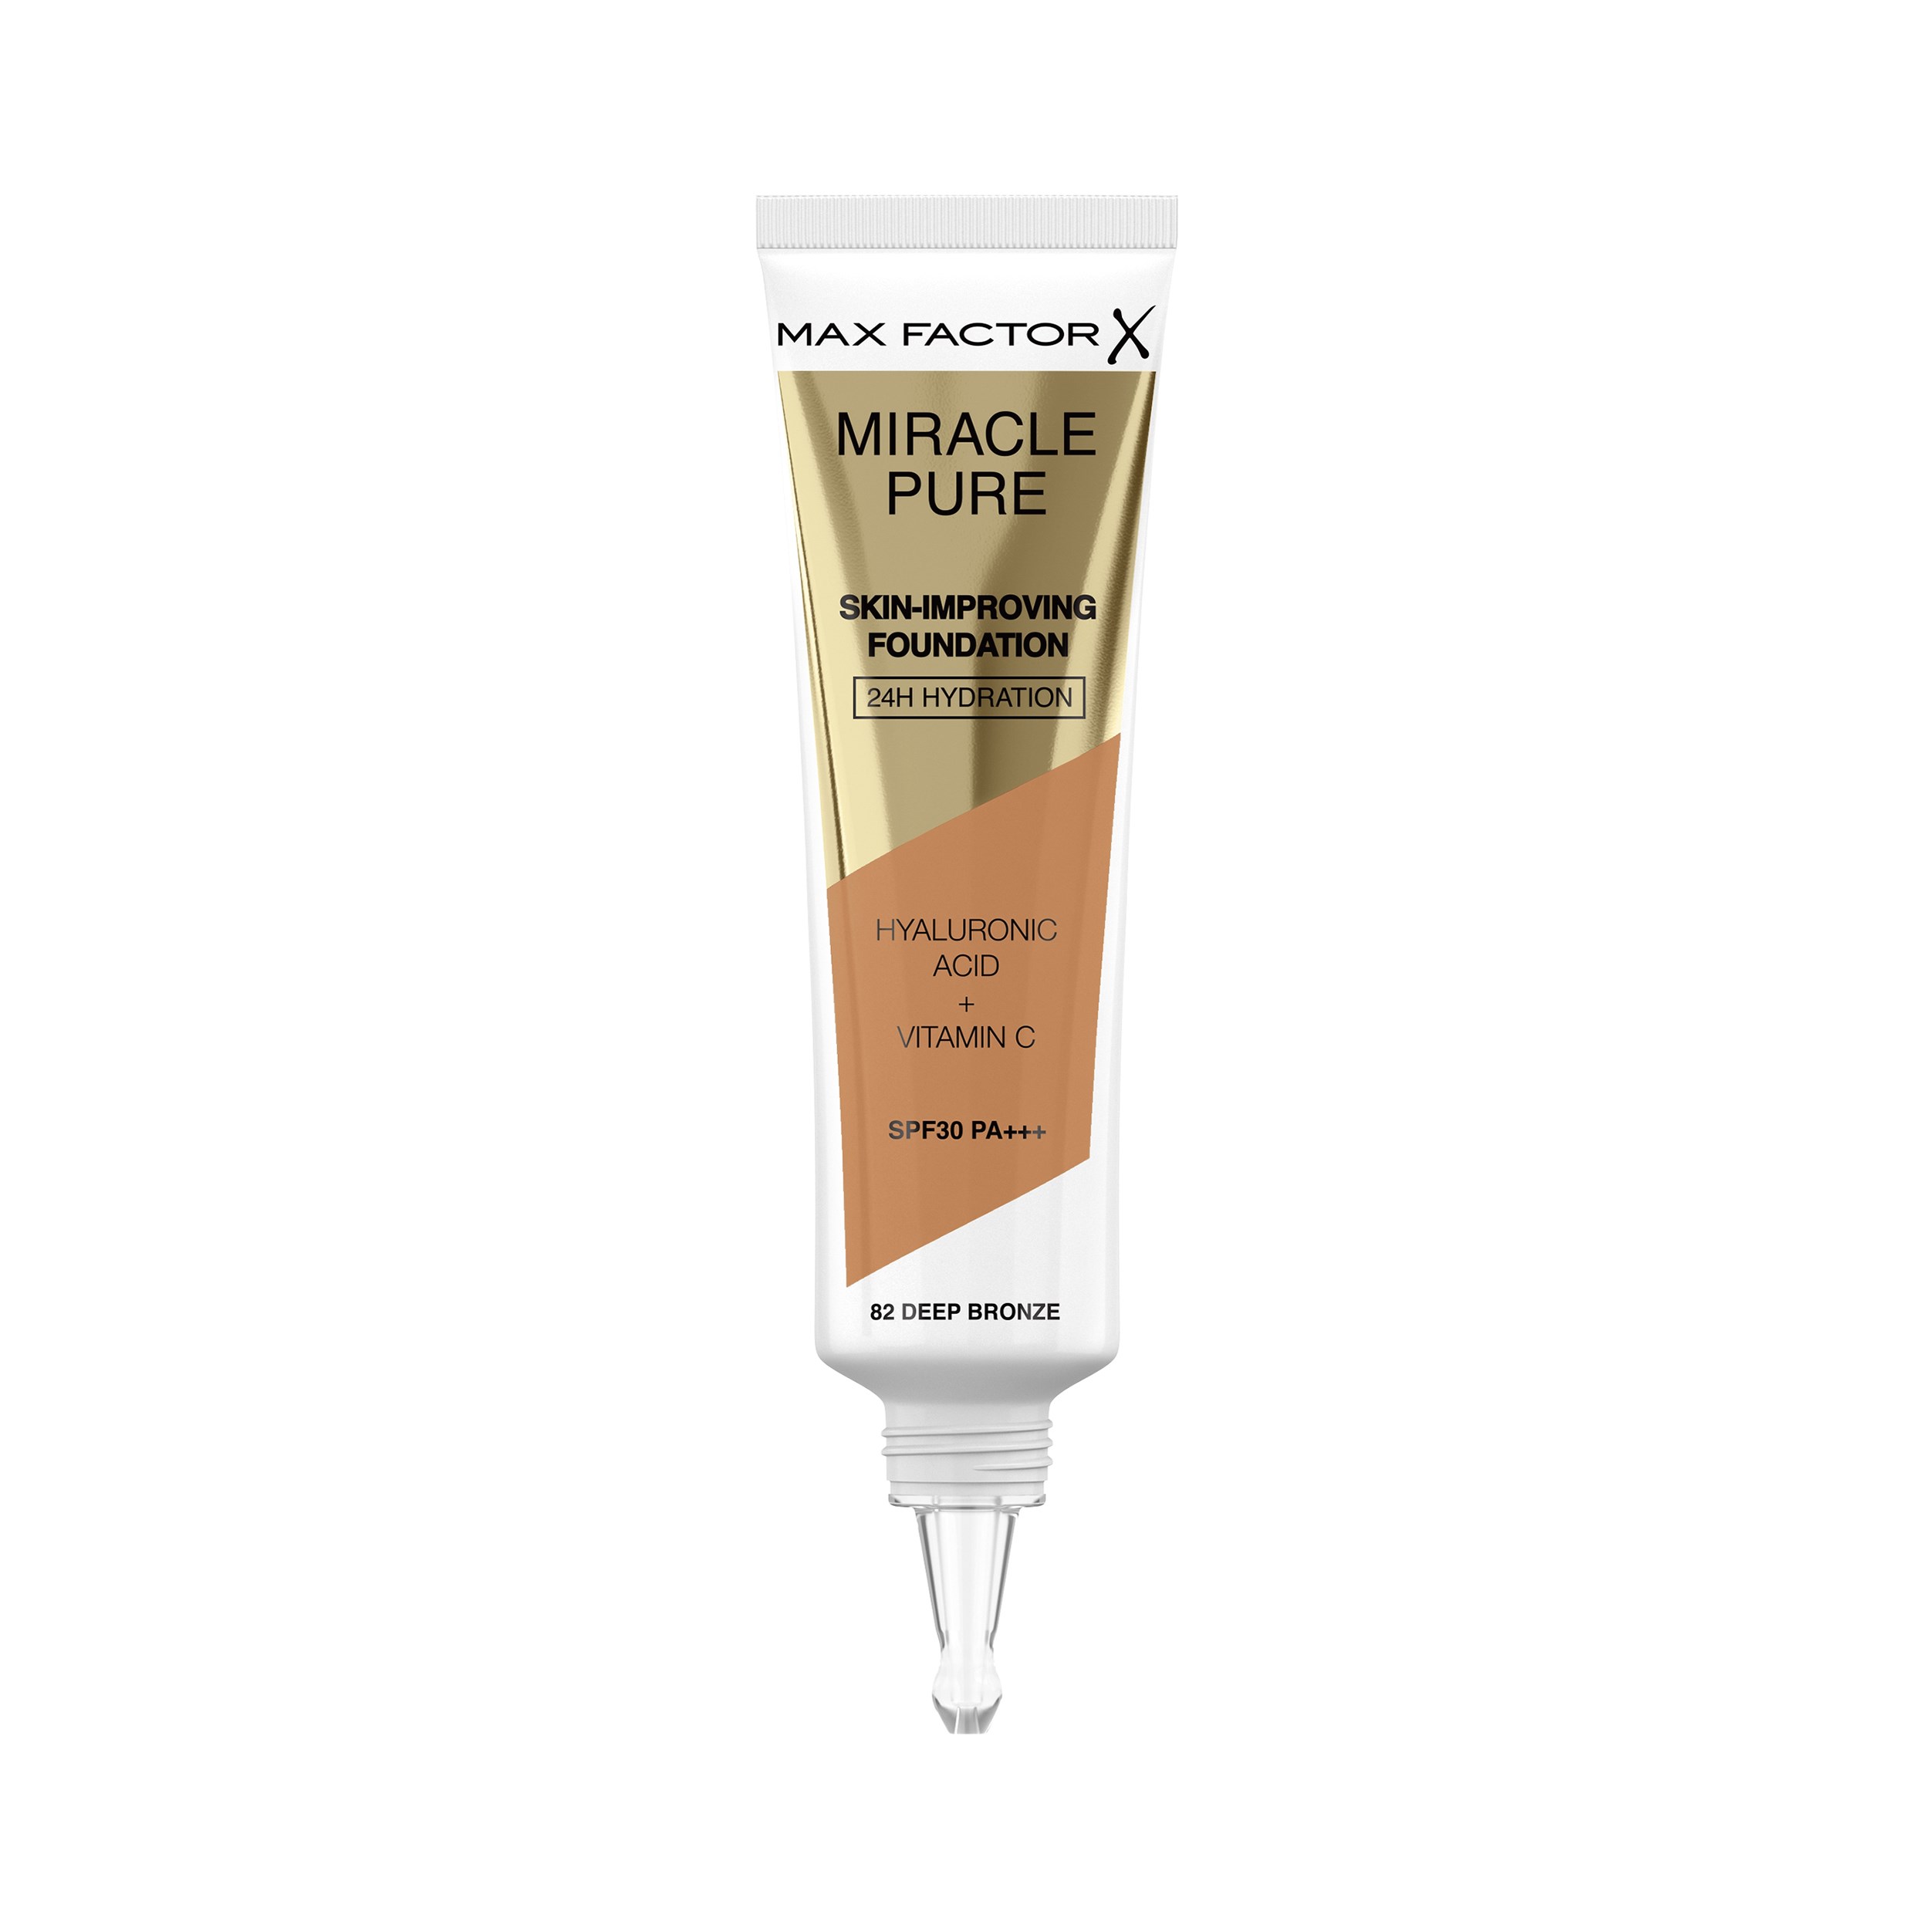 Max Factor Miracle Pure Skin-Improving Foundation 82 Deep Bronze